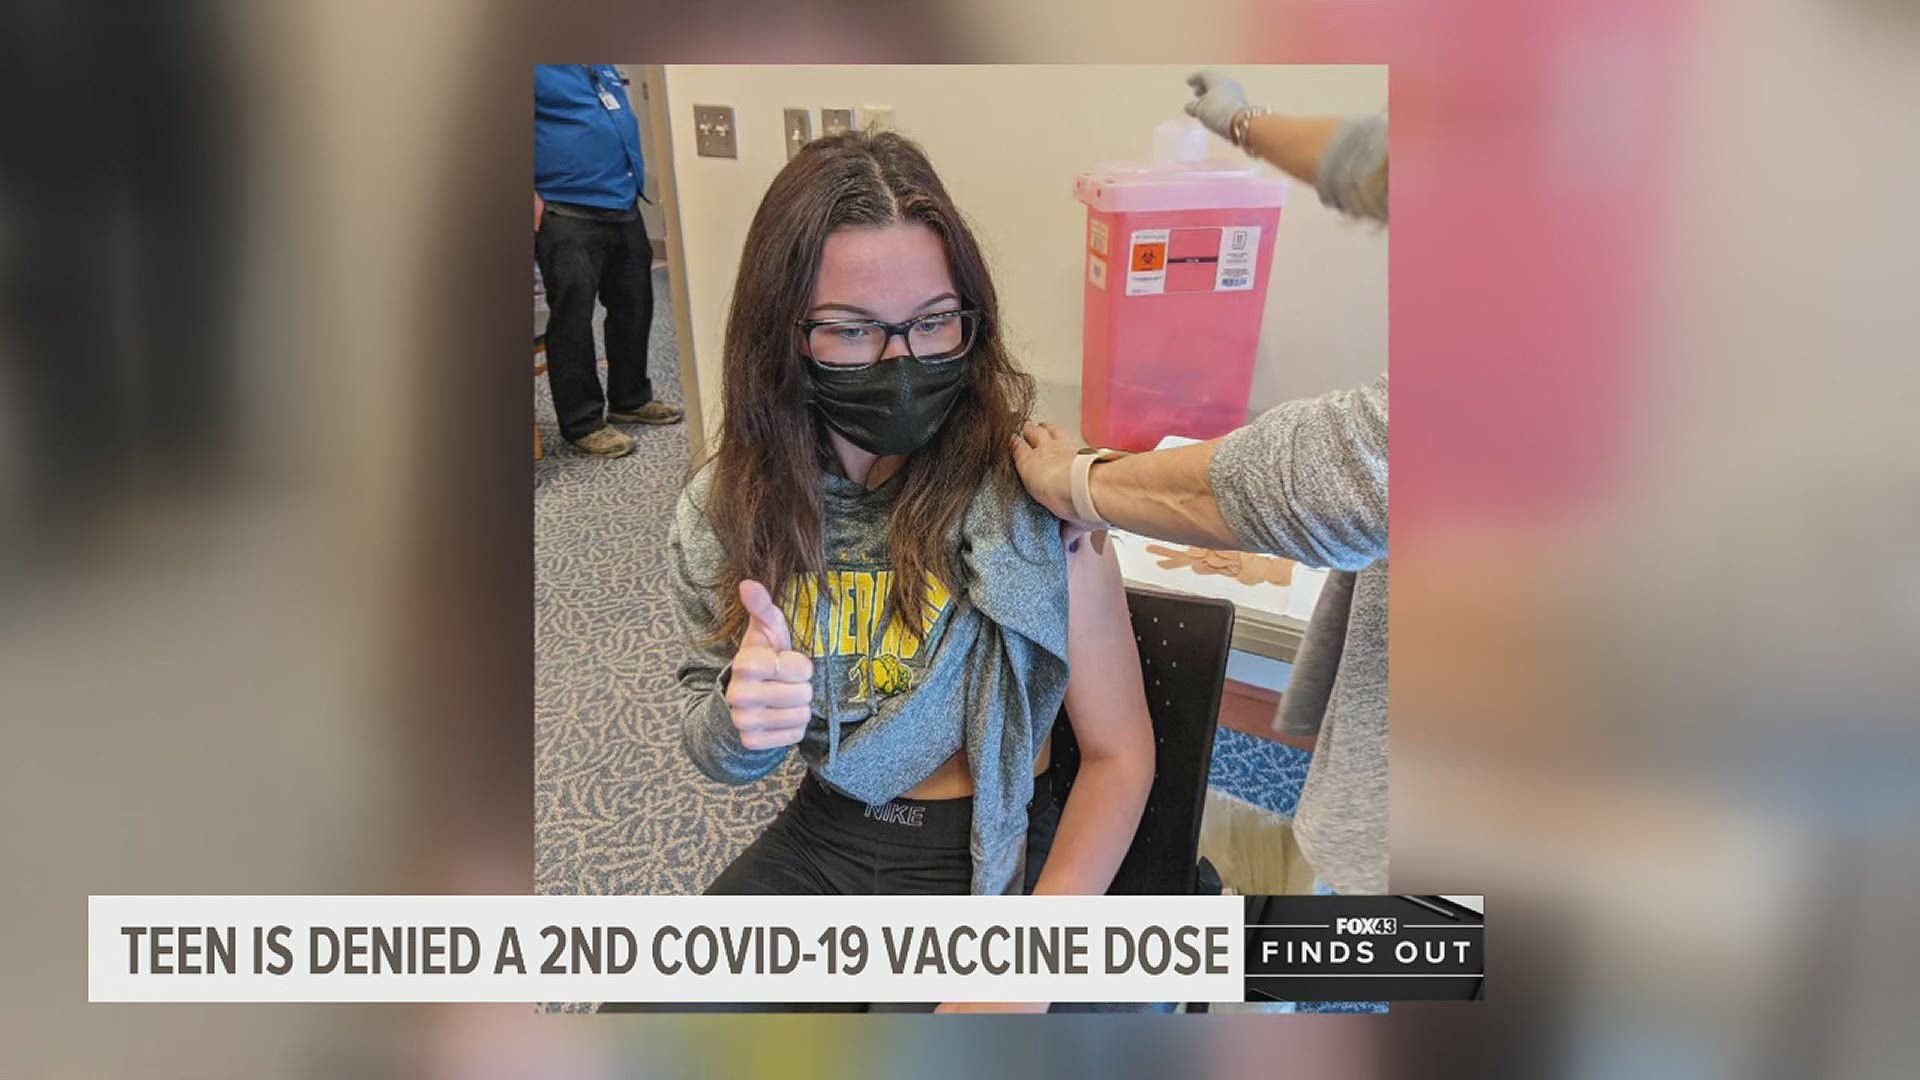 A 17-year-old who received the Moderna vaccine was told she couldn't get her second dose because the first dose was given in error. Then FOX43 Finds Out stepped in.